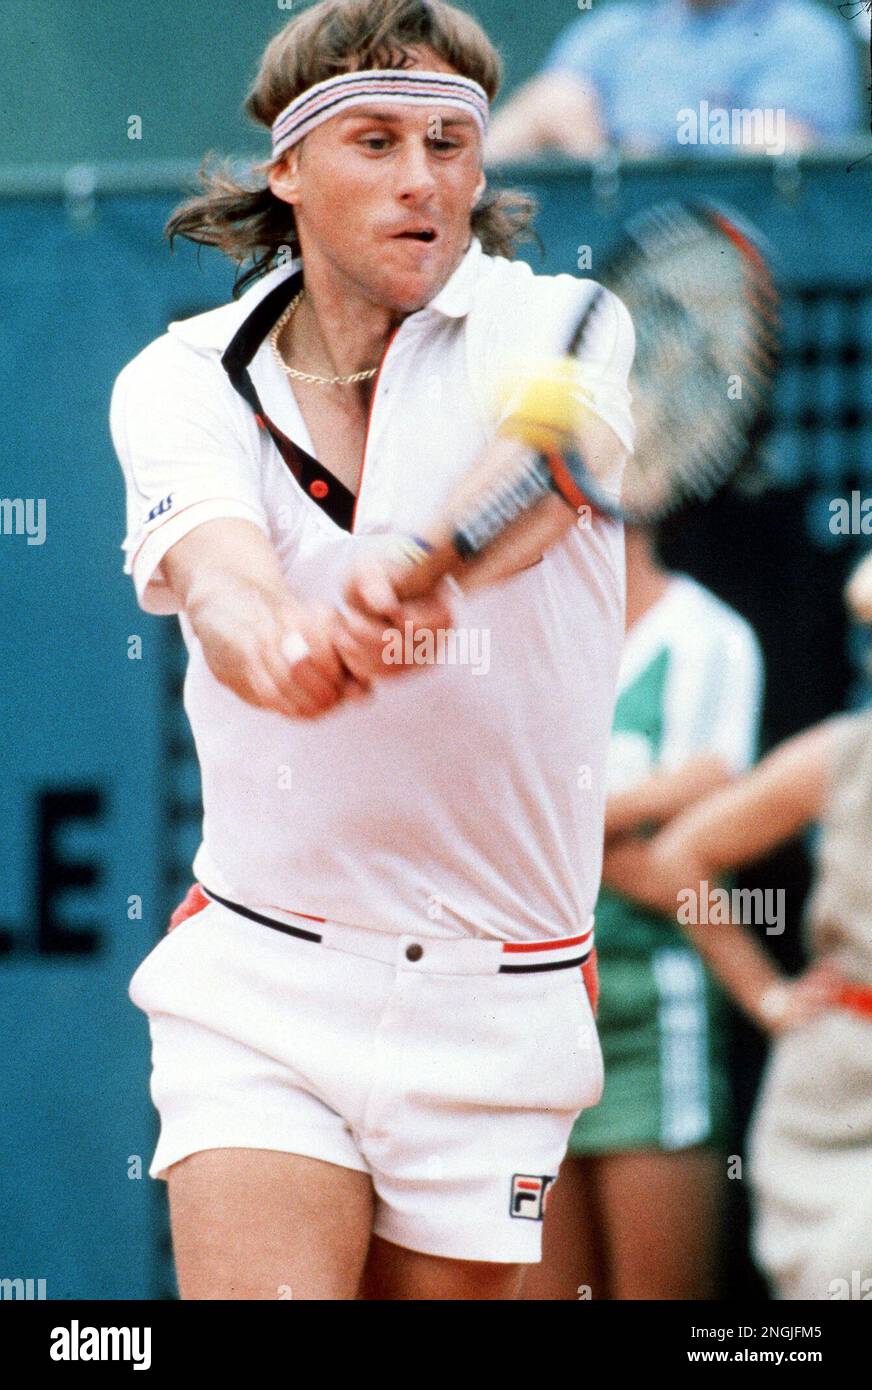 Bjorn Borg - Swedish tennis champion Bjorn Borg pictured in play during the  French tennis championships at the Roland Garros stadium. He won his sixth  French tennis title in the All England